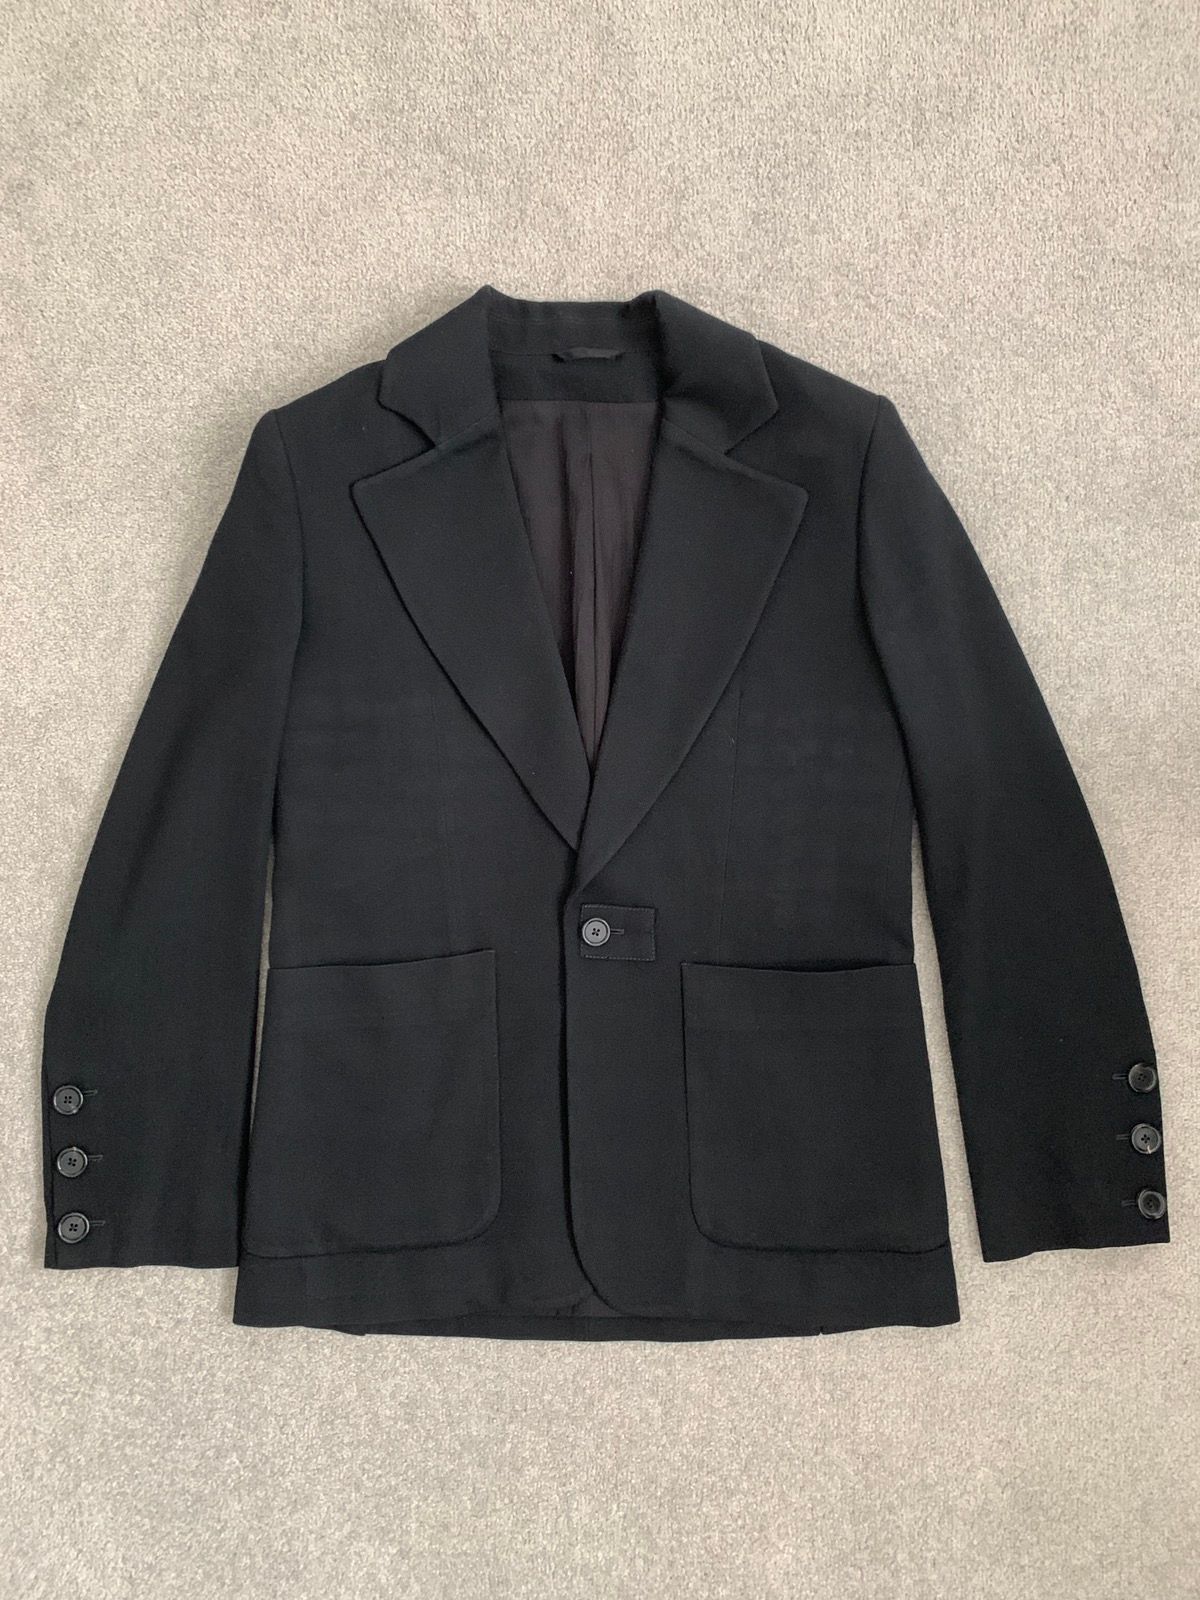 Pre-owned Ann Demeulemeester X Archival Clothing Black Wool Lainecotton Blazer